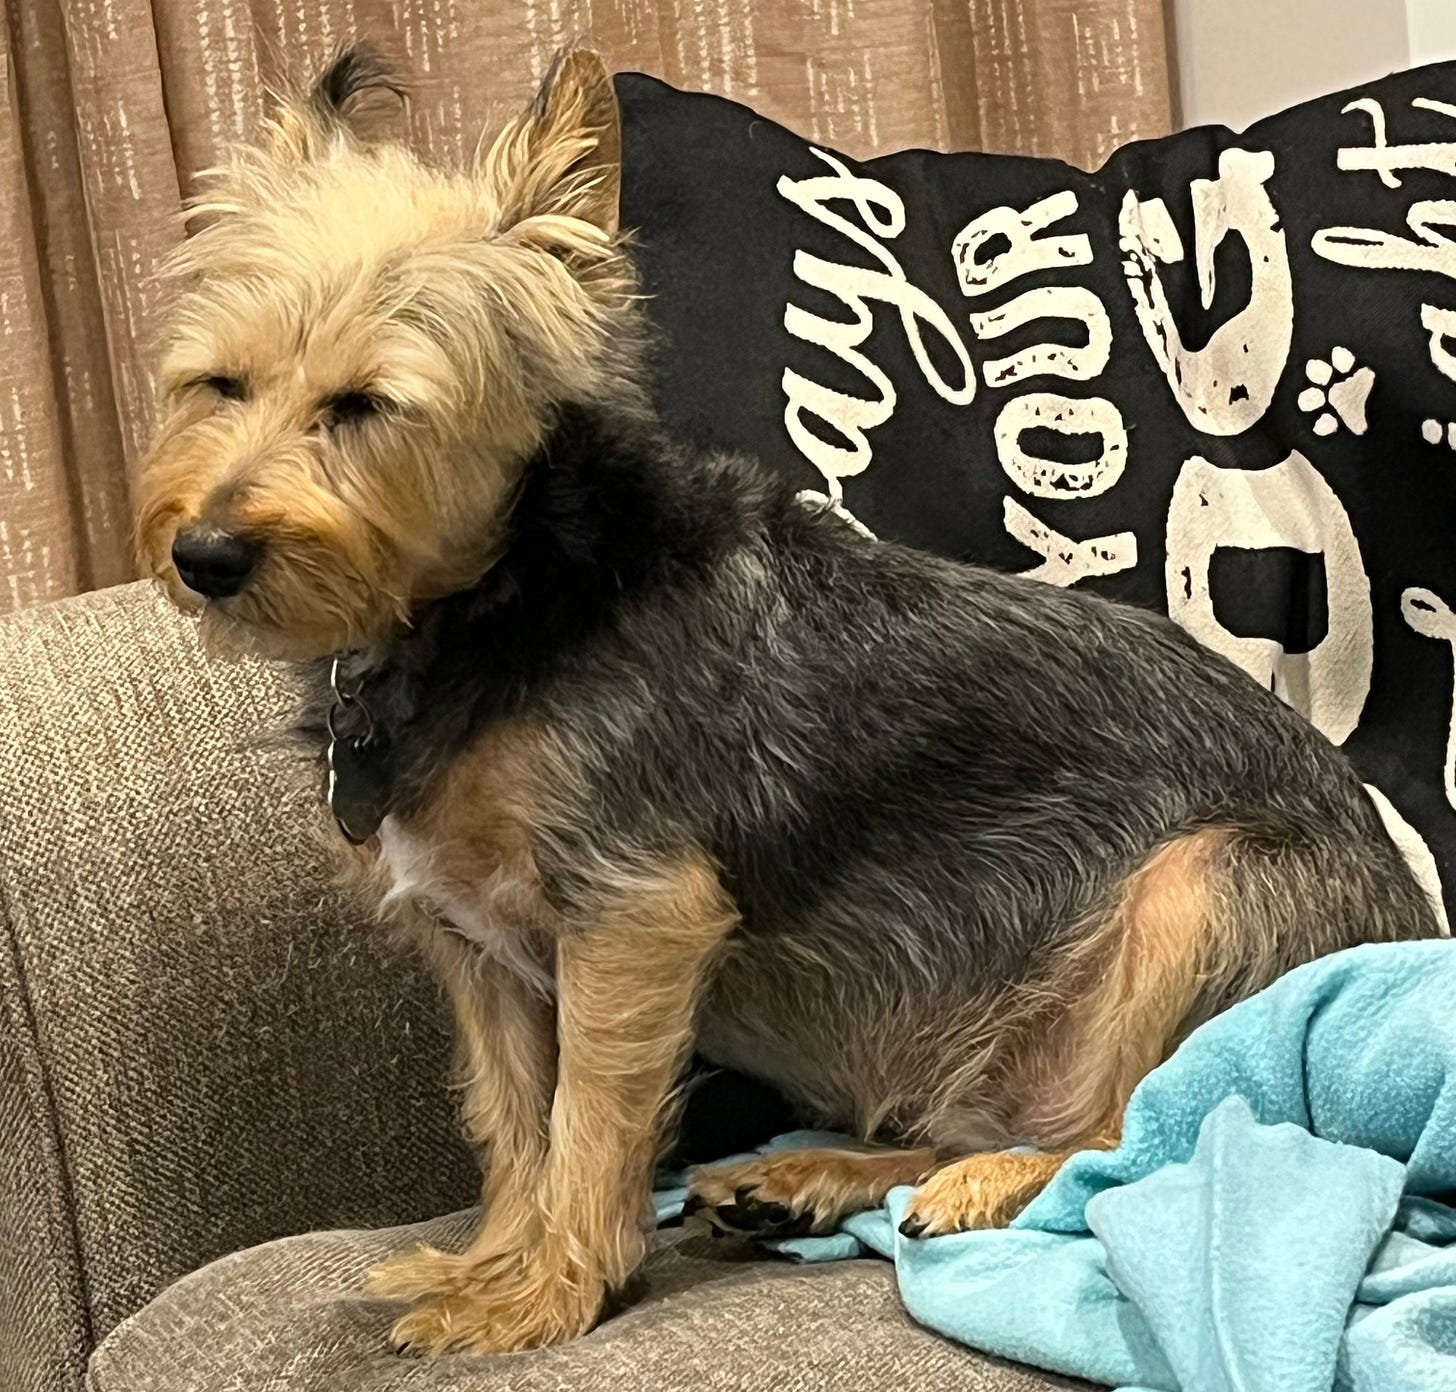 A tan and black terrier sitting on a couch with her eyes closed